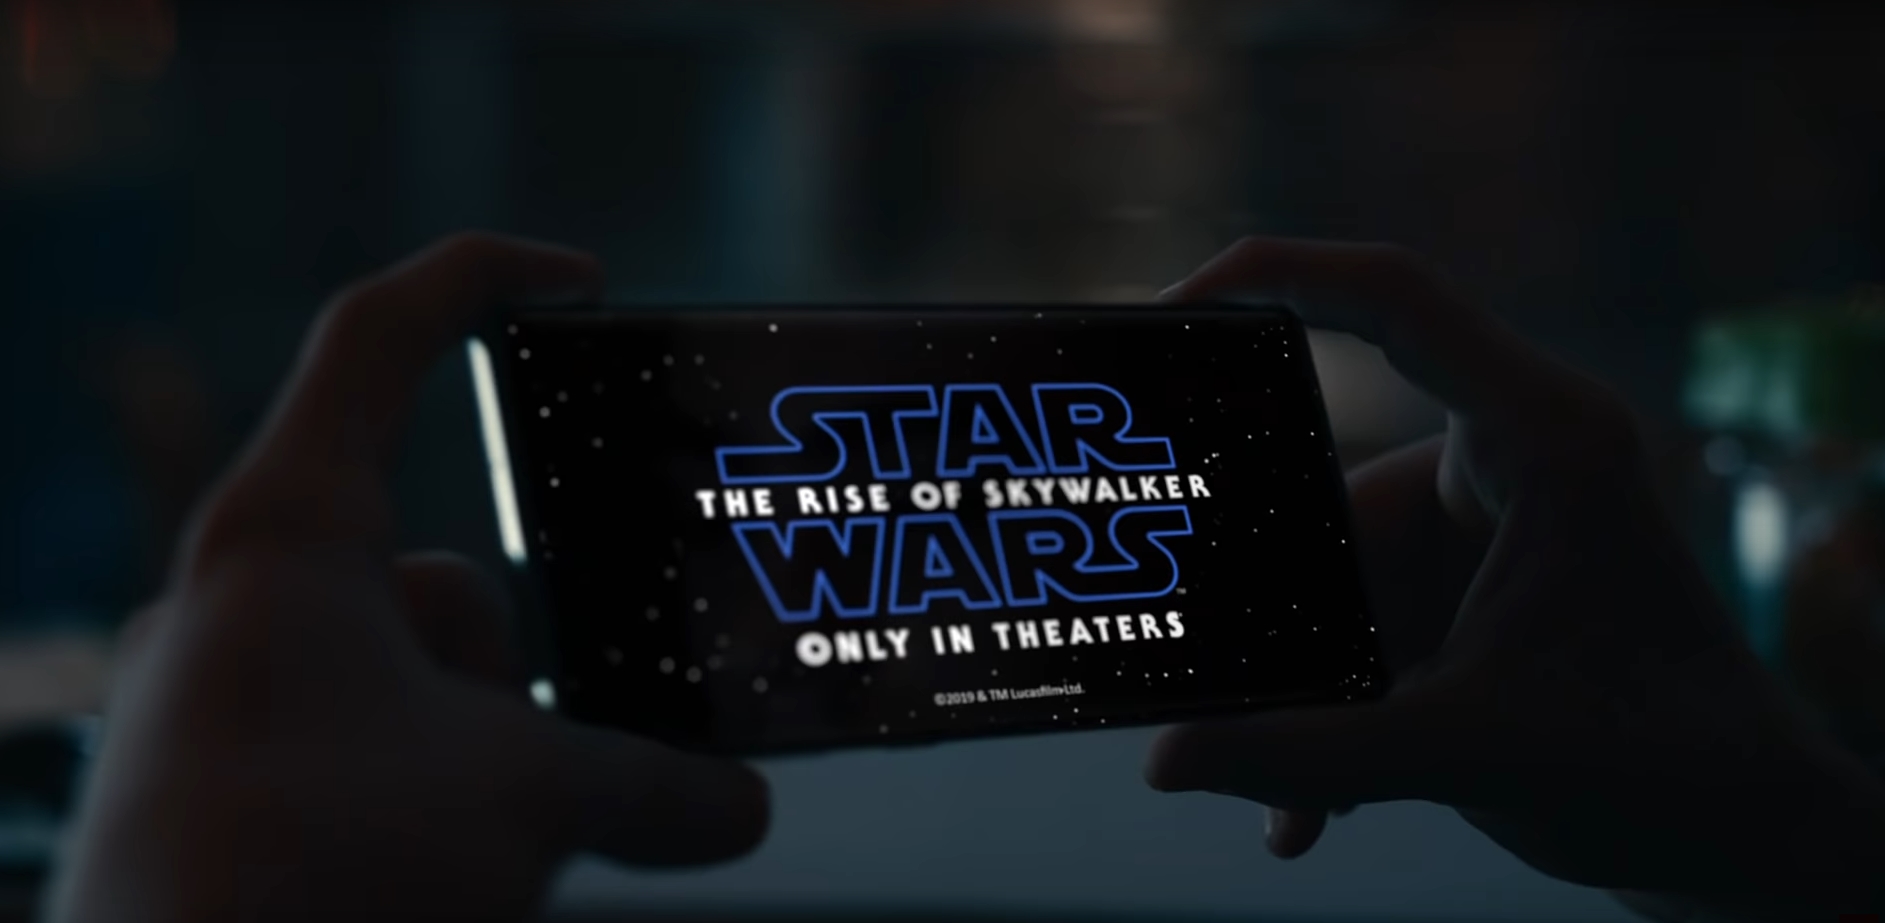 Samsung joins forces with Star Wars for holiday collaboration film